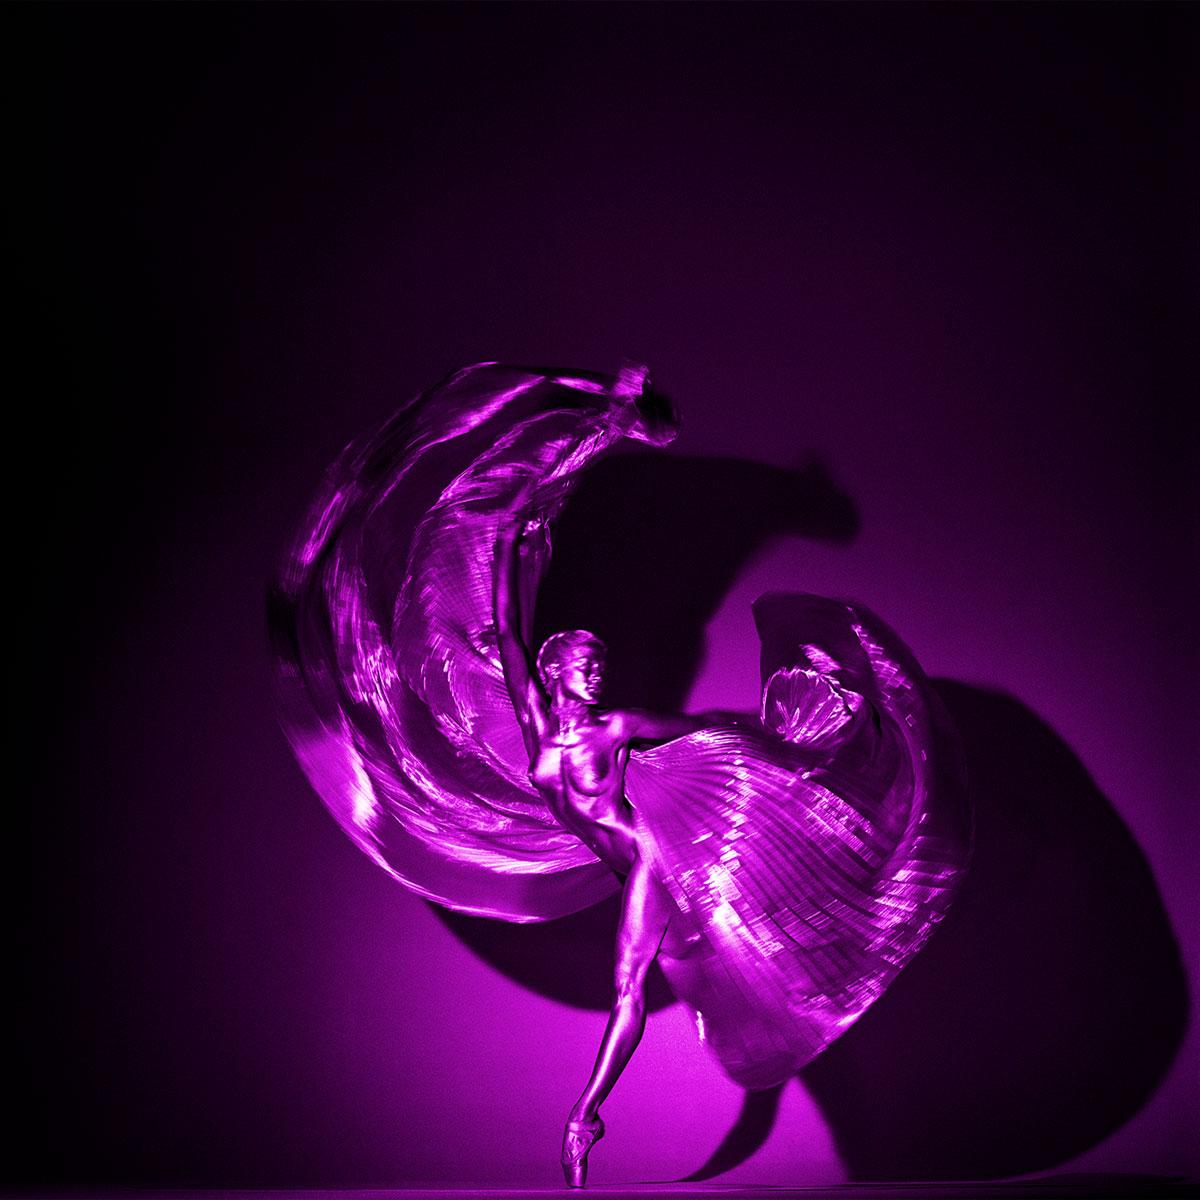 Series: PURPLE
All available sizes and editions:

40" x 40" editions of 18
50" x 50" editions of 7
60" x 60" editions of 3
72" x 72" editions of 1

Archival Pigment Print on Fine Art Baryta paper
Mounted and Framed

Guido Argentini is an Italian